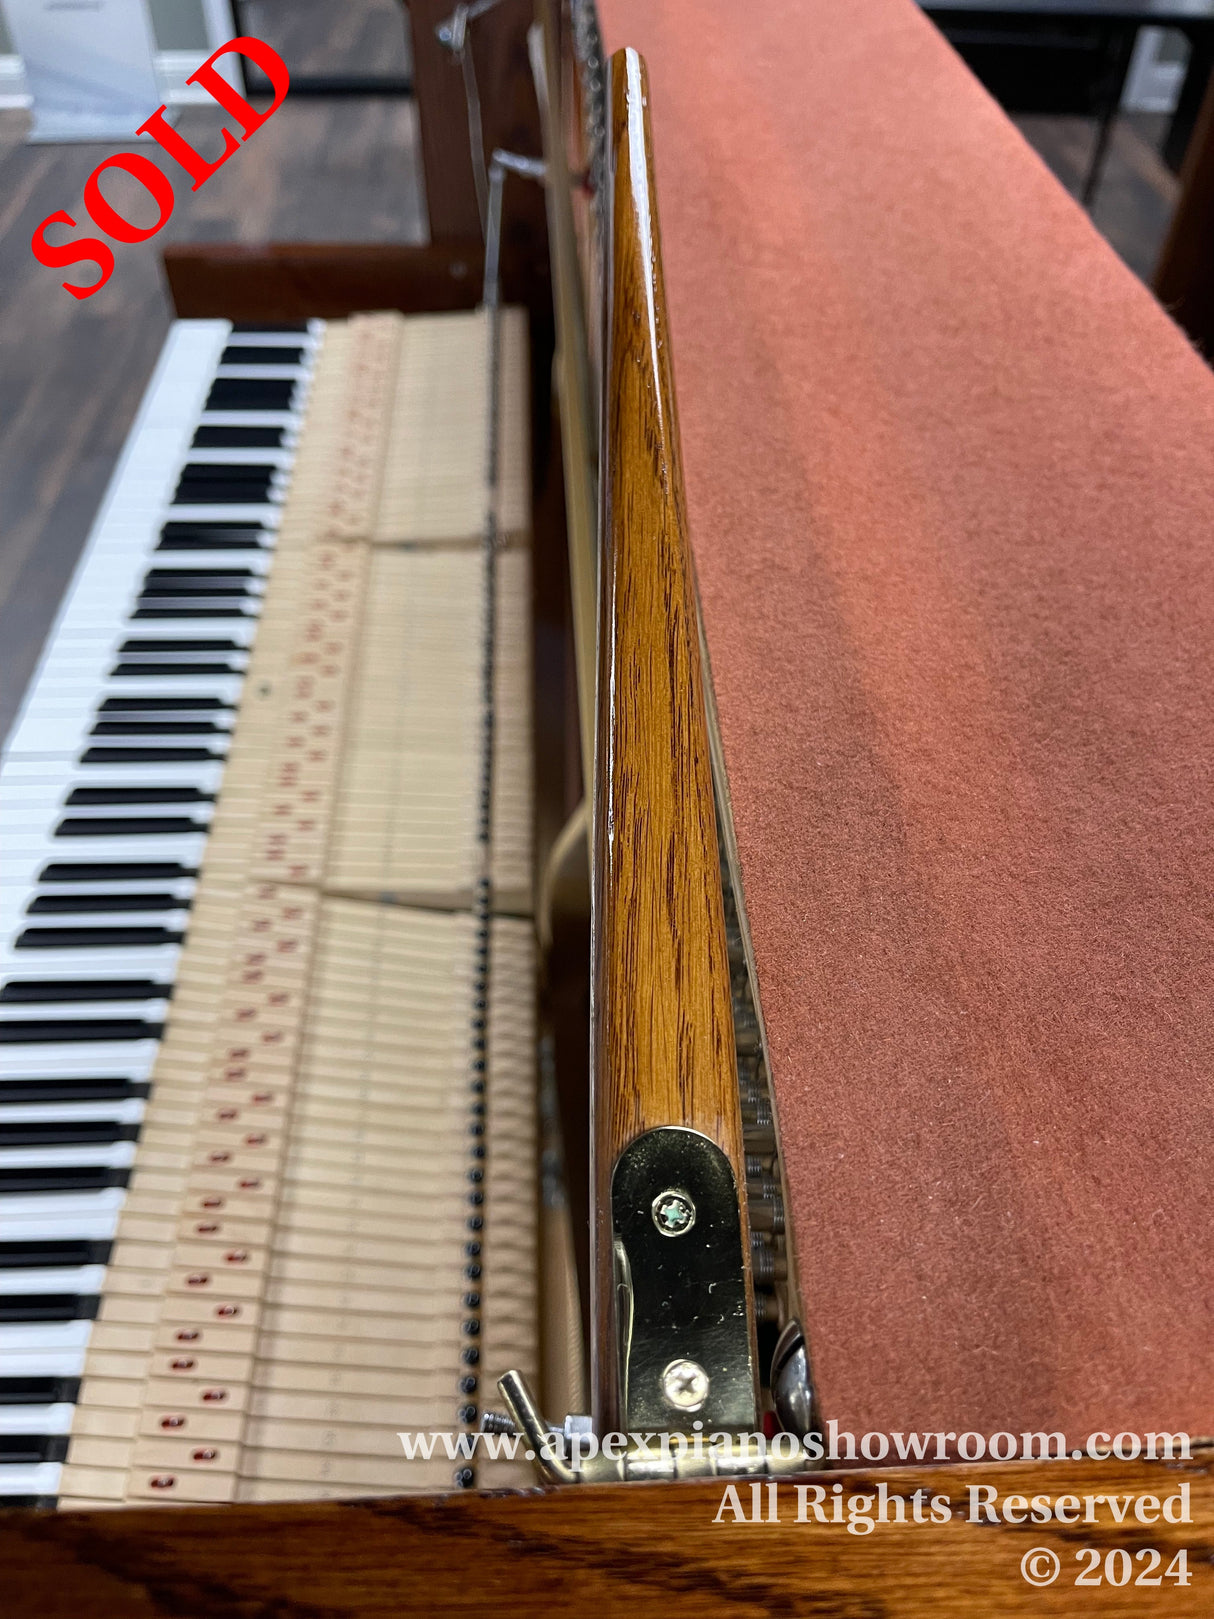 Close-up view of a pianos keys and internal hammer mechanism, showcasing the wooden texture, intricate design, and string alignment typical of classic acoustic pianos.